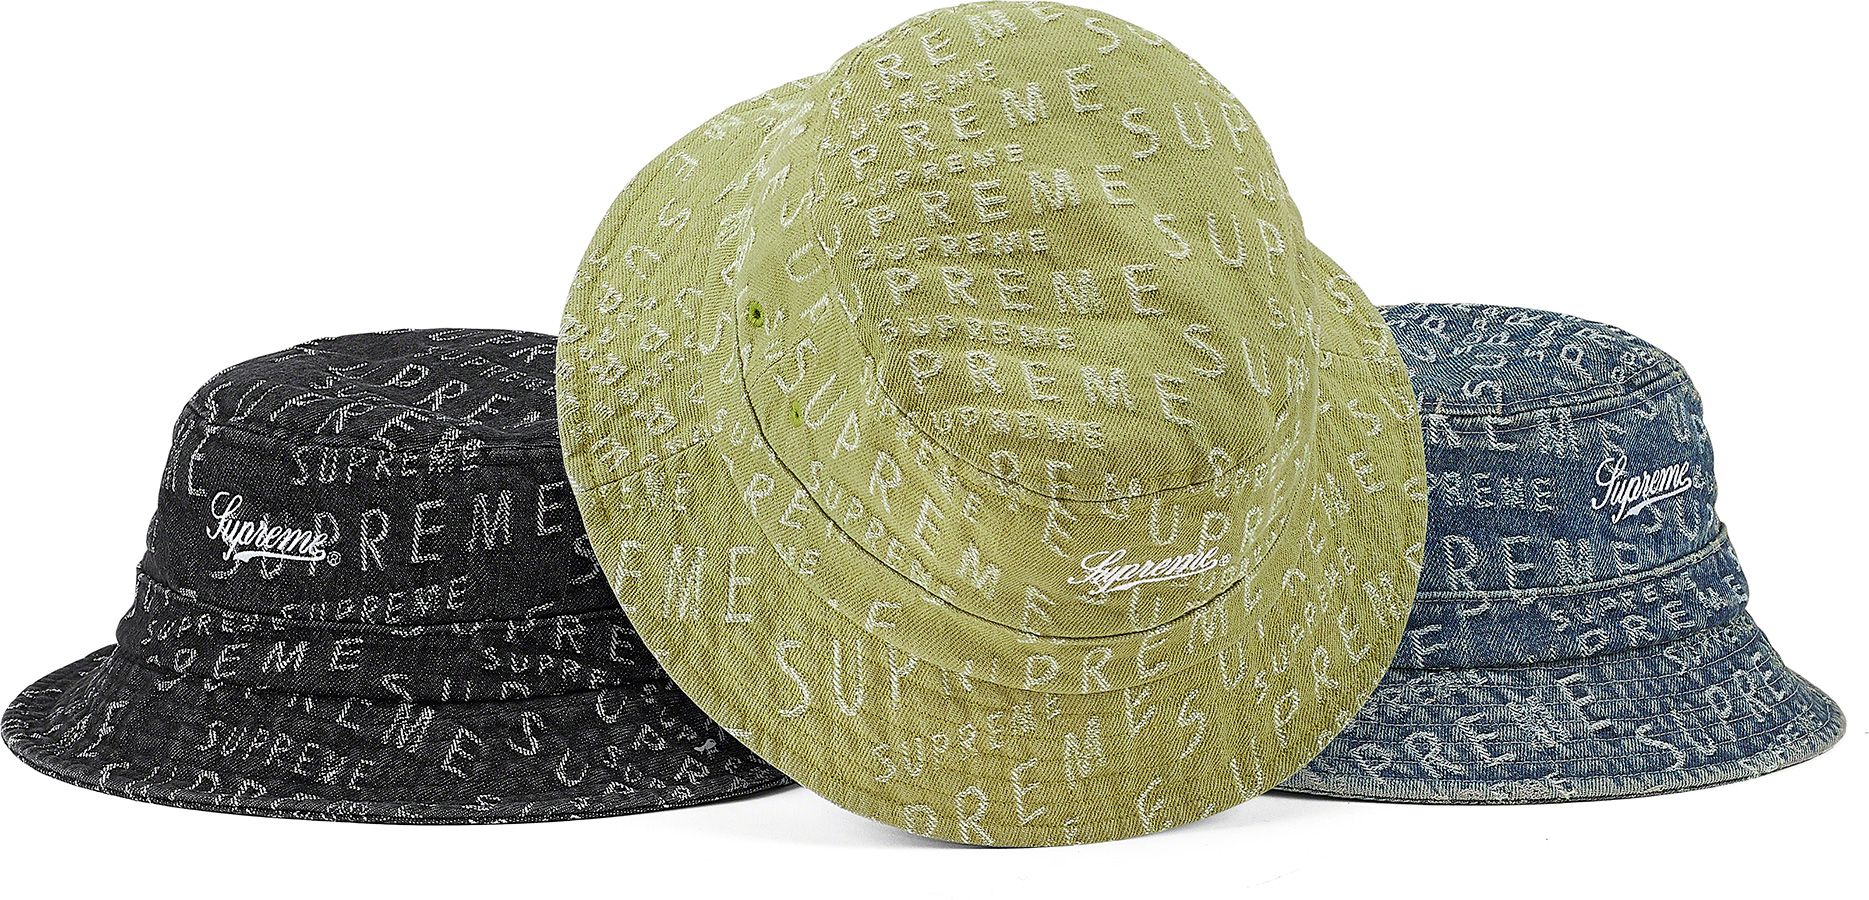 GORE-TEX Bell Hat - Spring/Summer 2021 Preview – Supreme